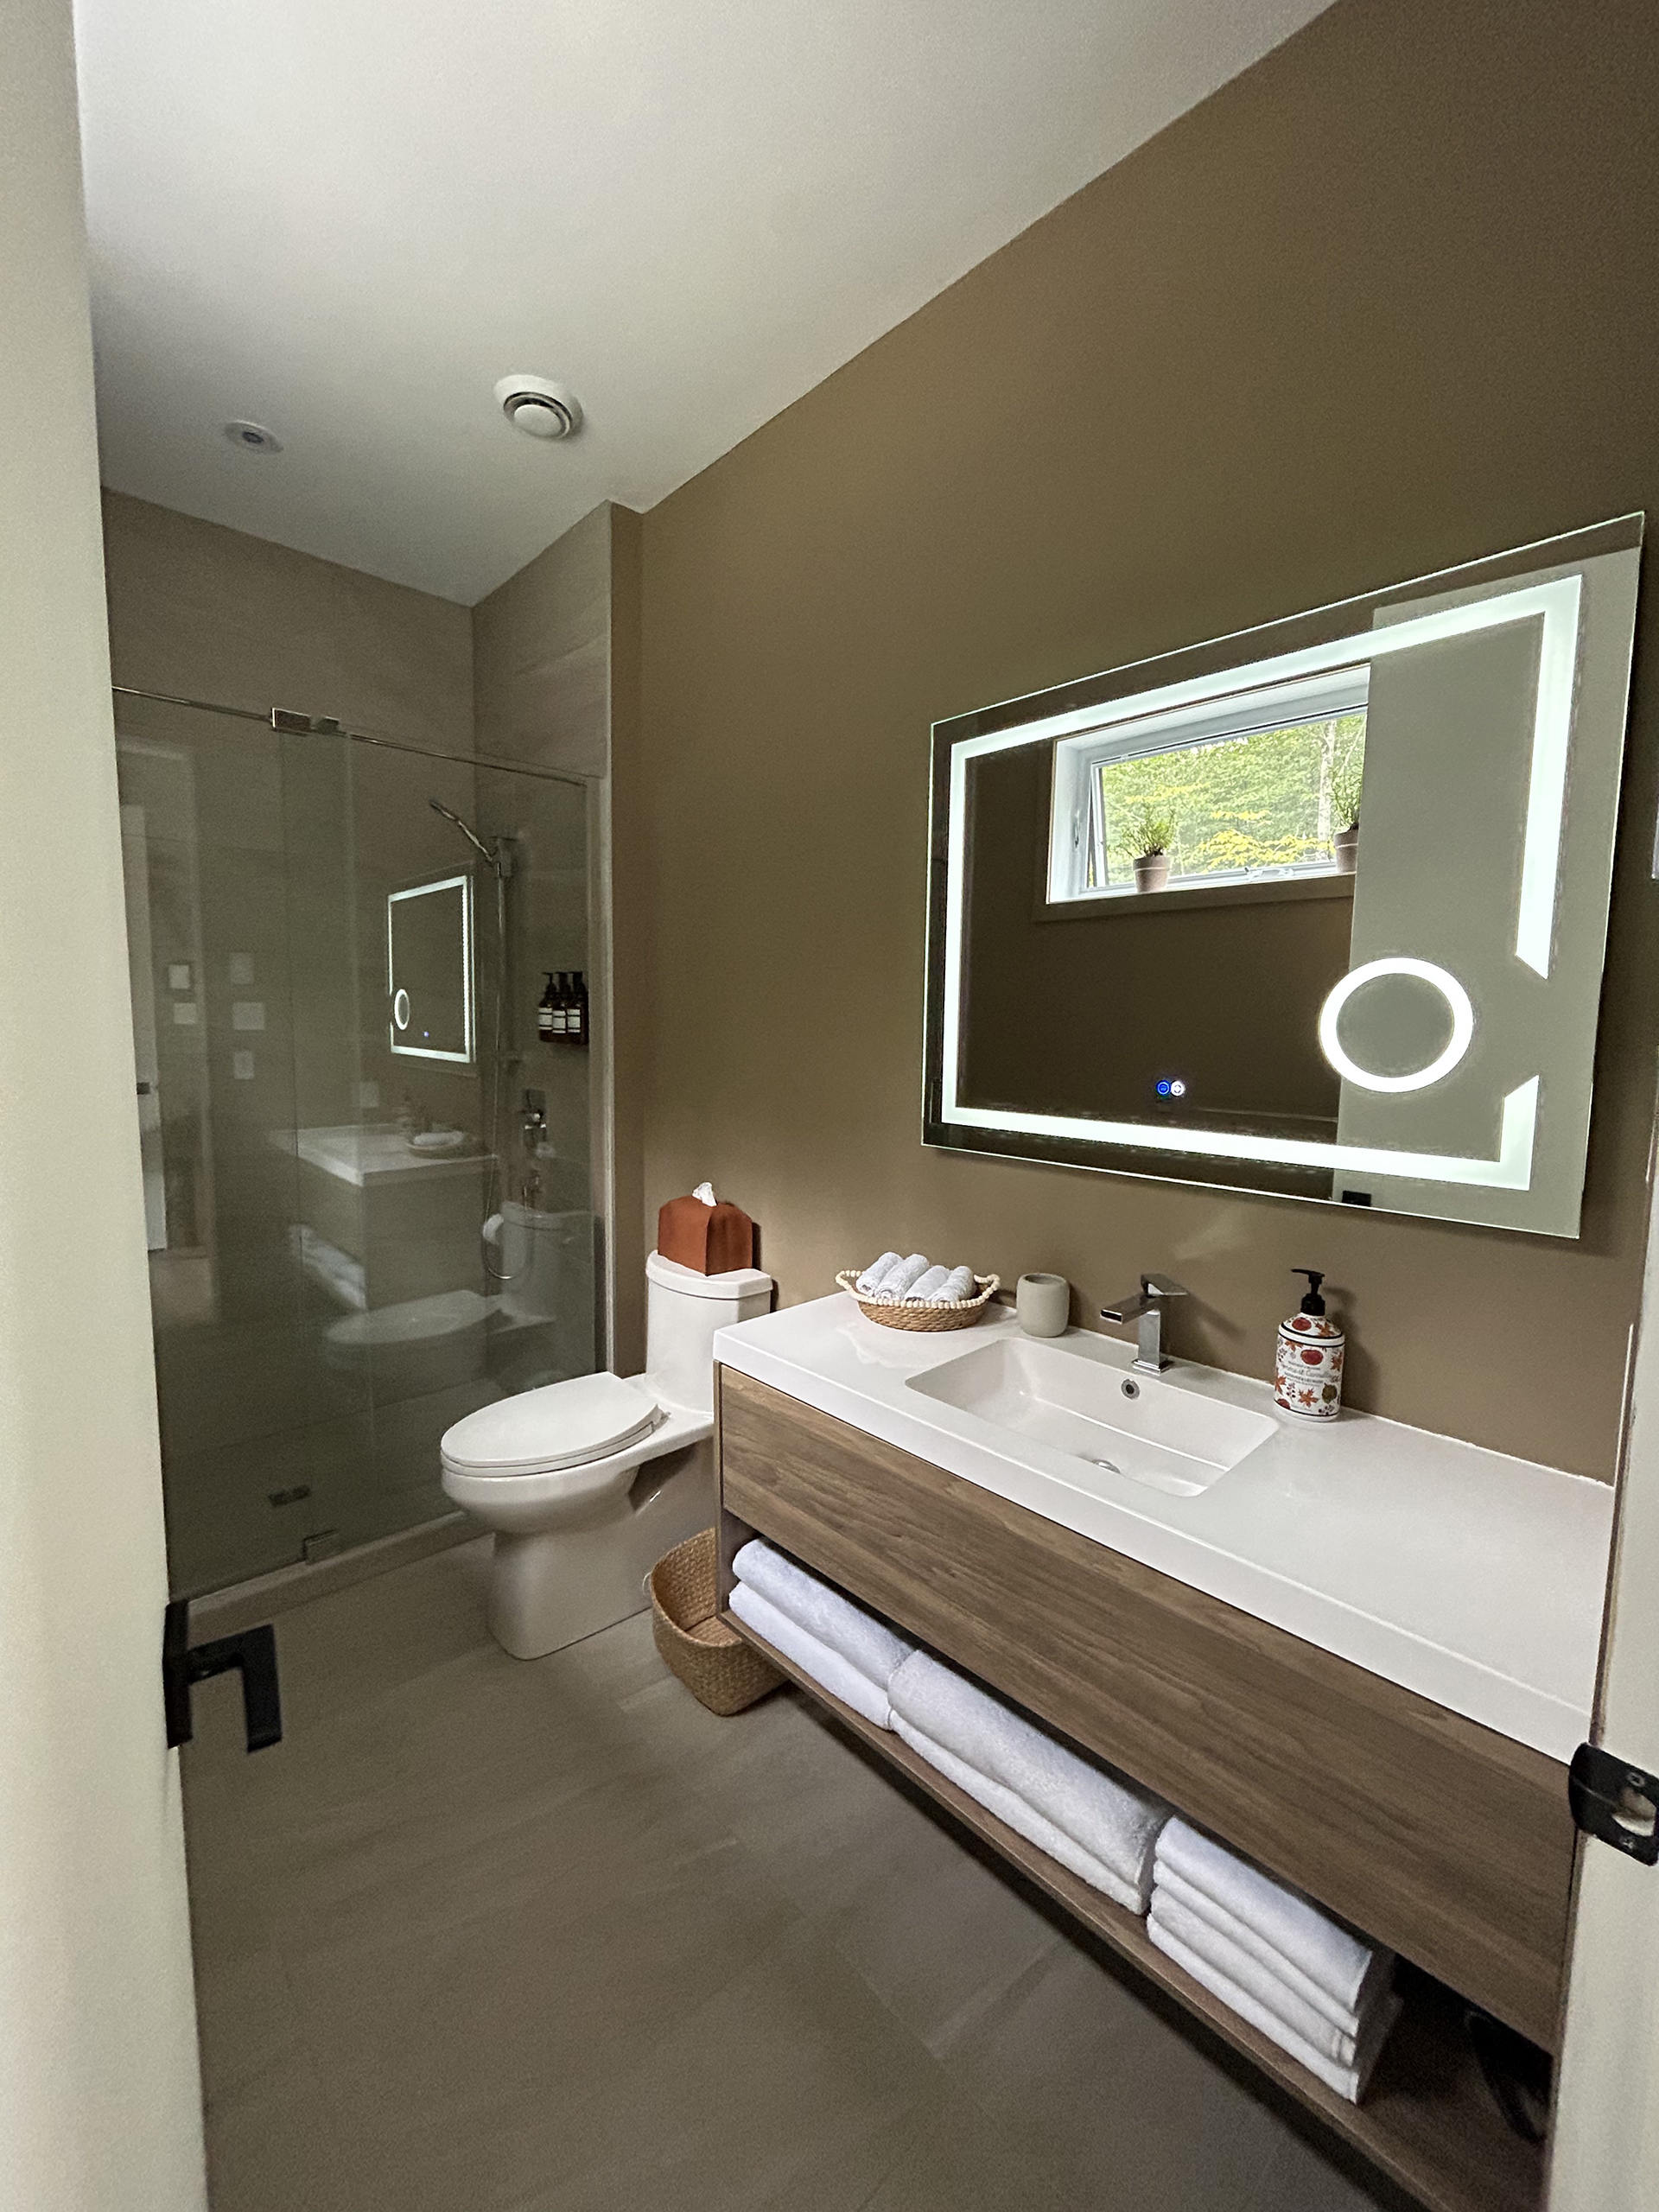 Ensuite bathroom to king sized bed